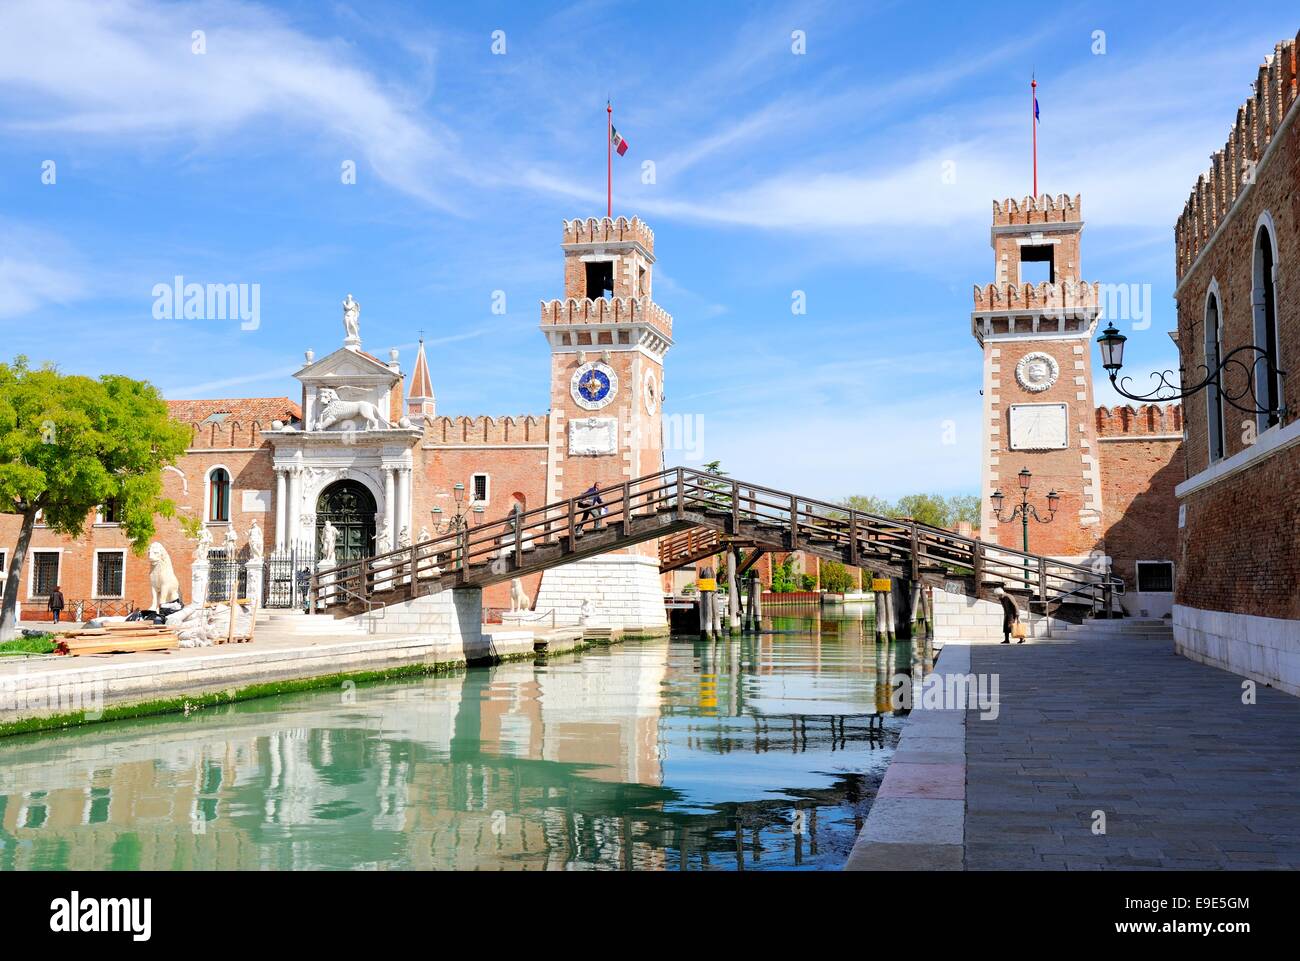 The gate of Arsenale was built in 1460 by Antonio Gambello. The Arsenale, house of industry, was founded 1104. It was one of the Stock Photo